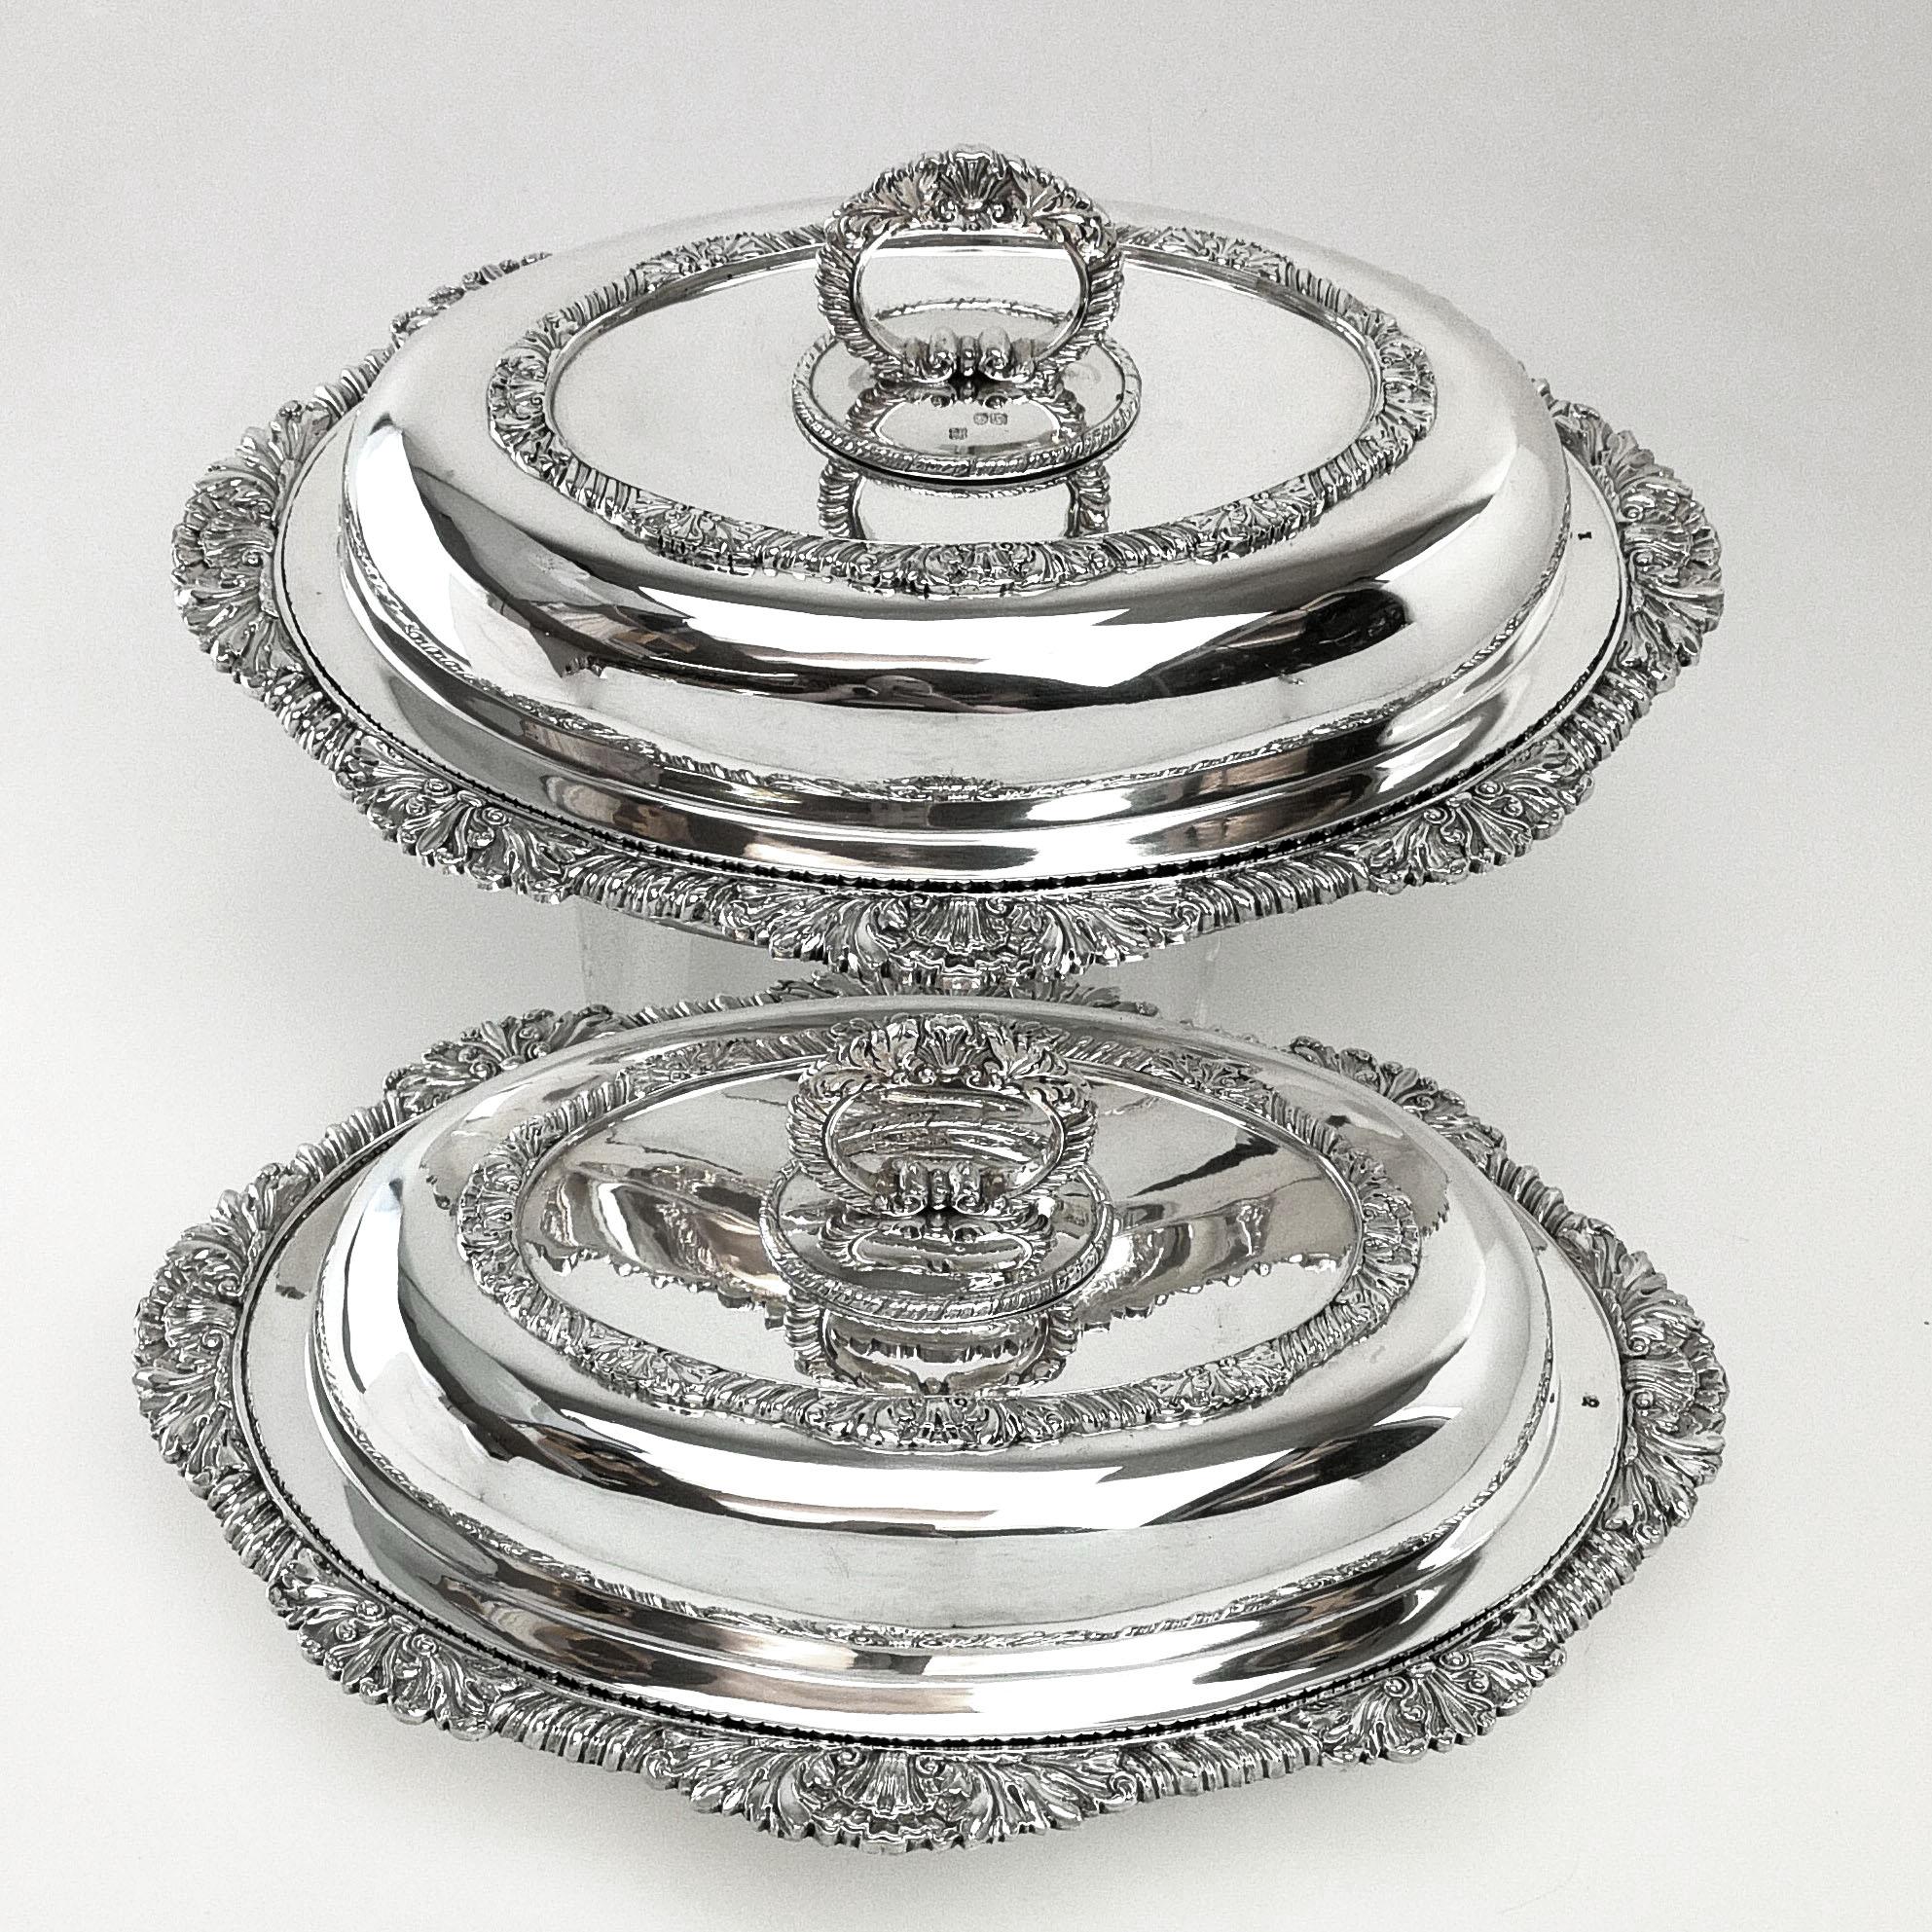 Pair of Antique Victorian Sterling Silver Entree Dishes / Serving Dishes 1843  2